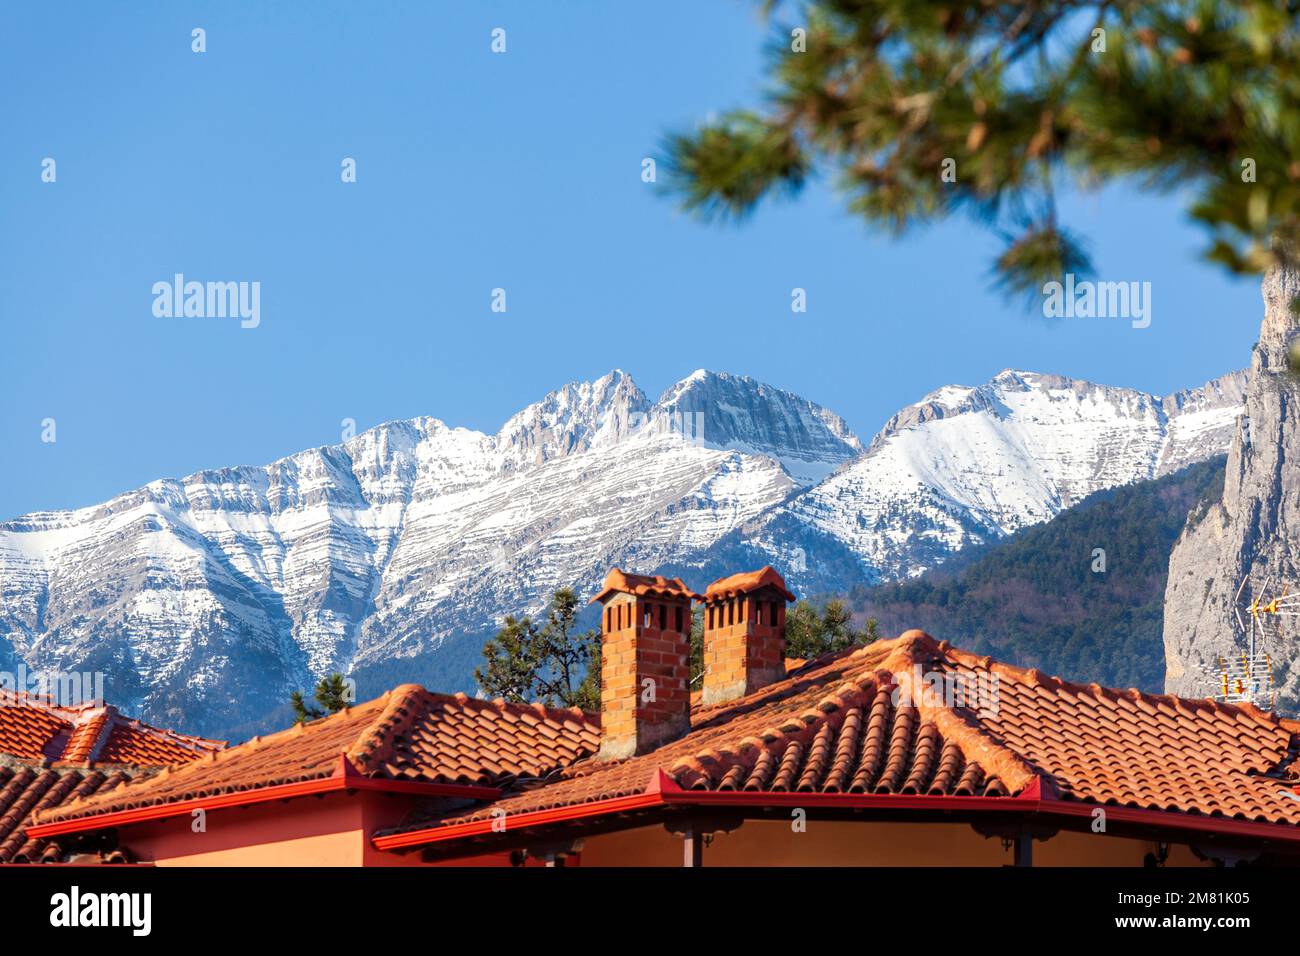 View of snow cover over the famous Mount Olympus as seen over the rooftops of Litochoro town, in Macedonia region, northern Greece, Europe. Stock Photo